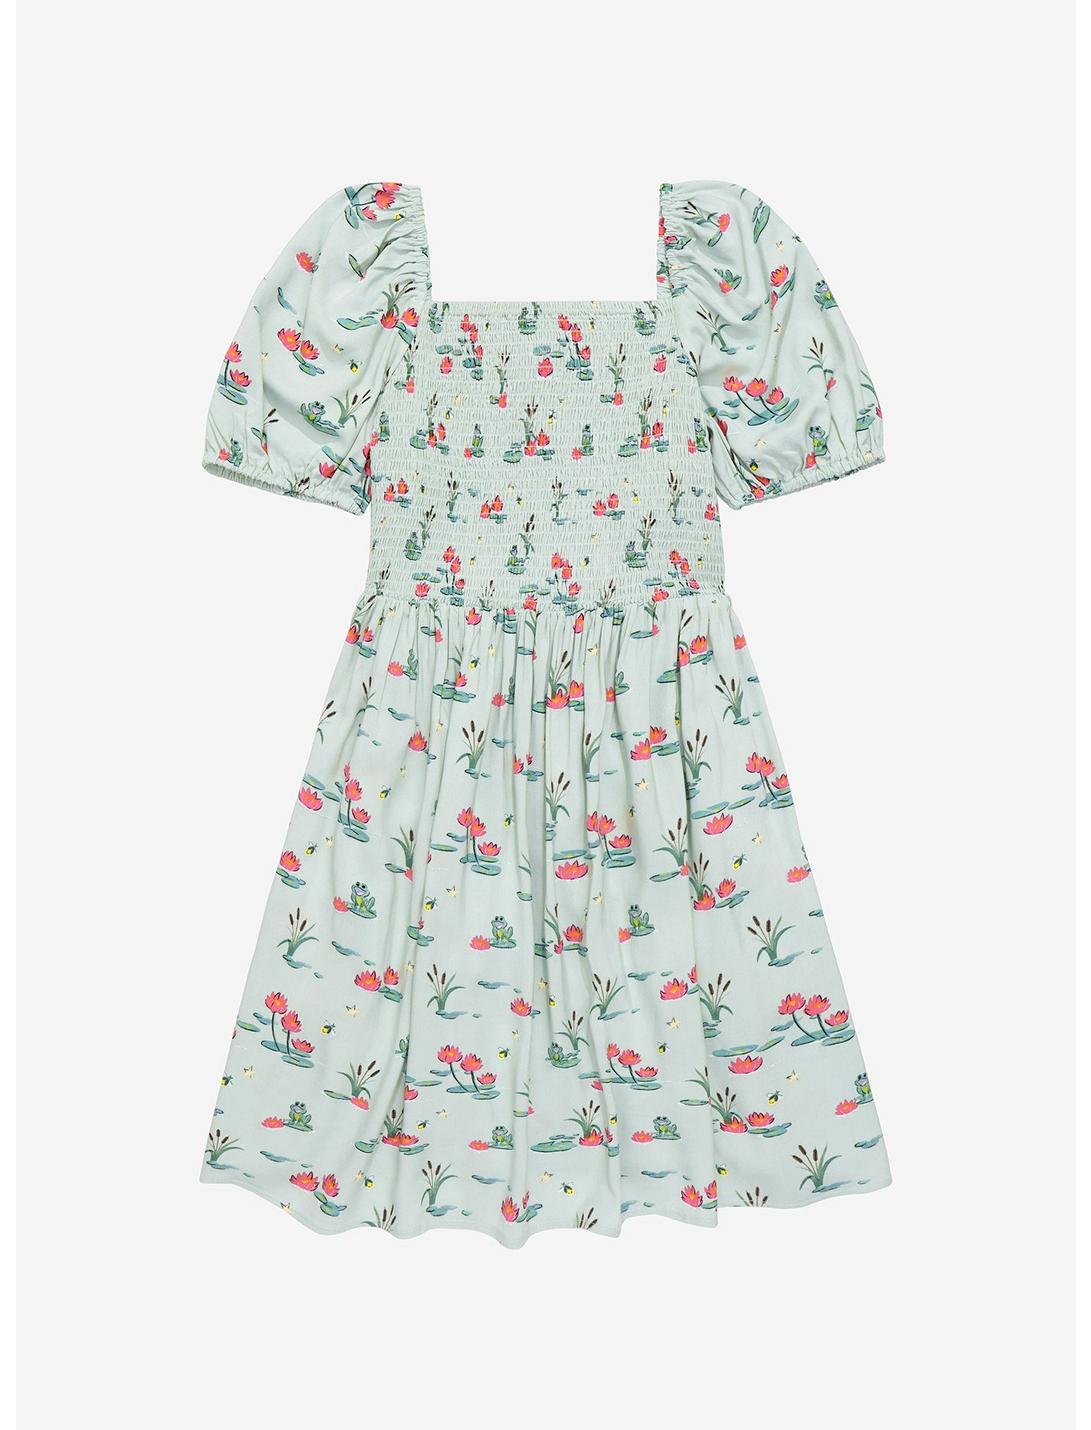 Disney The Princess and the Frog Lily Pads & Flowers Smocked Dress - BoxLunch Exclusive, LIGHT GREEN, hi-res